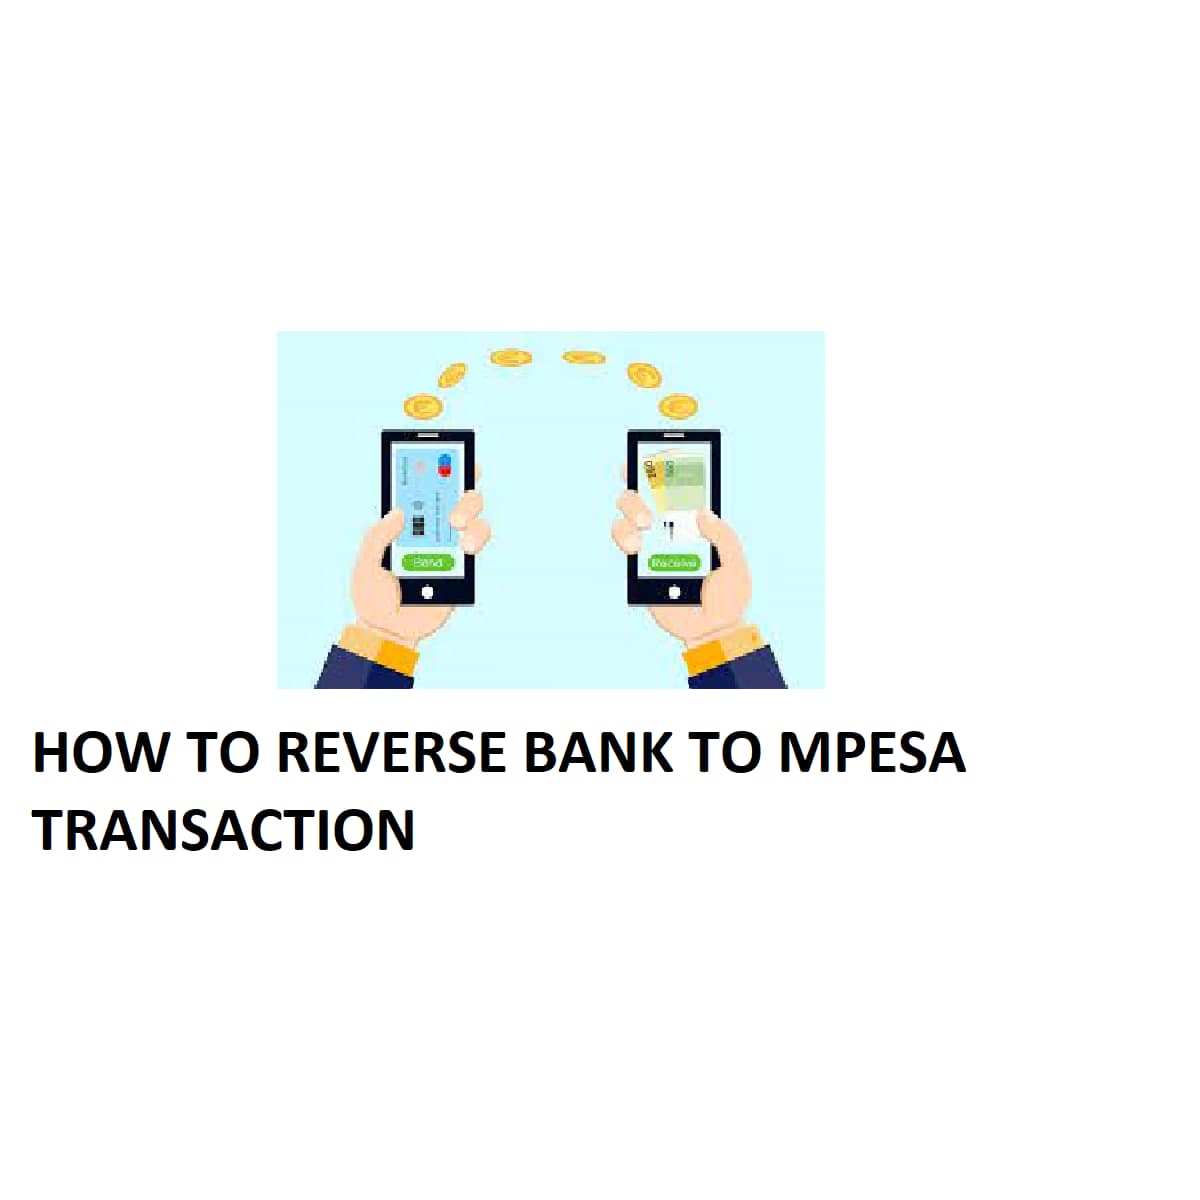 How to Reverse Bank to Mpesa Transaction